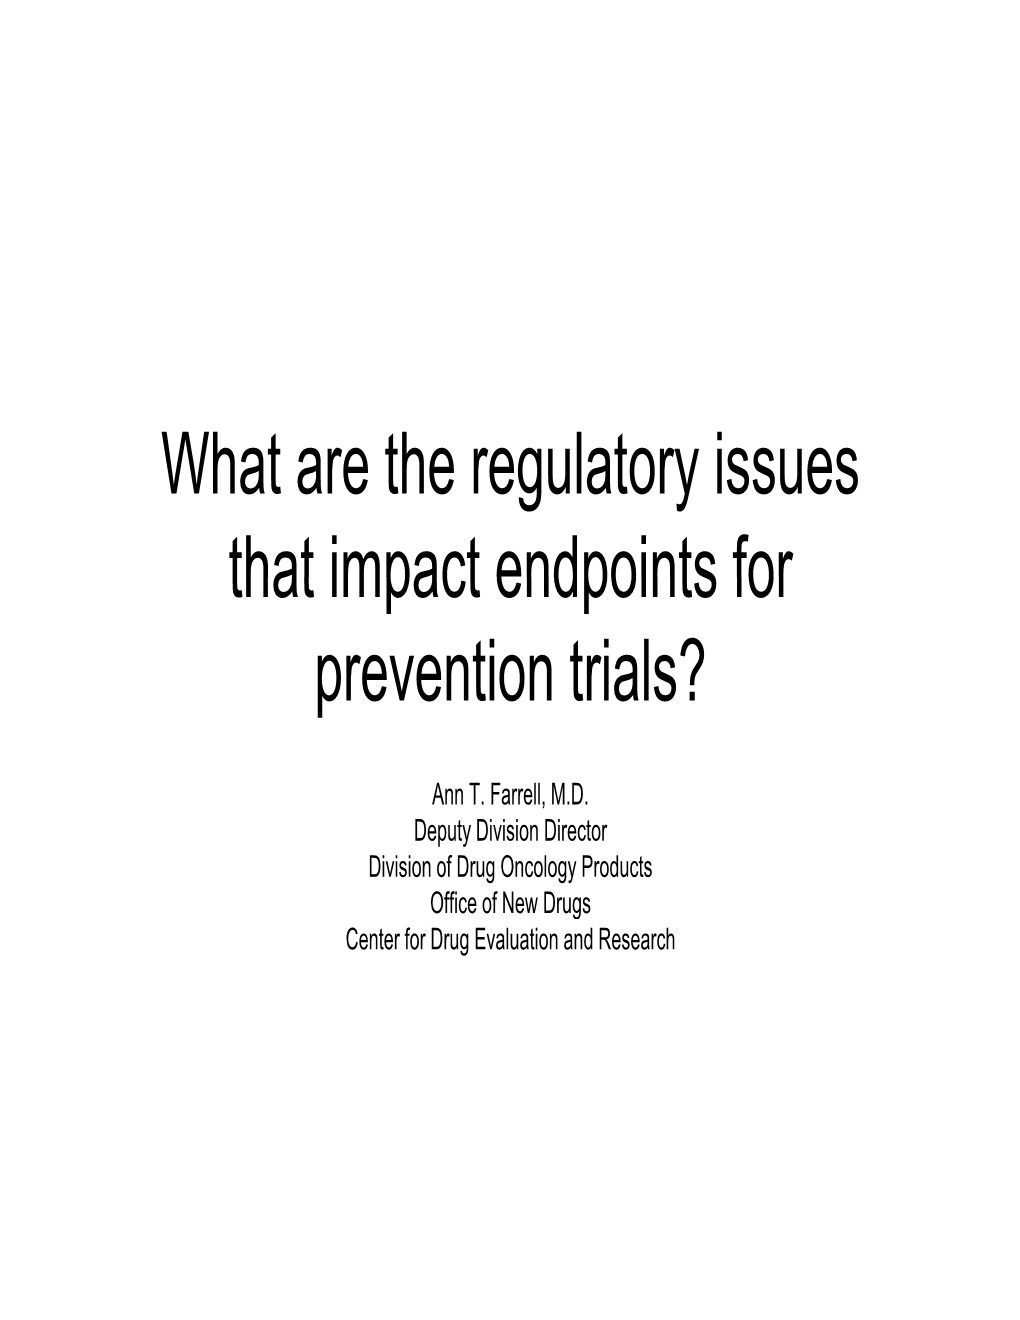 What Are the Regulatory Issues That Impact Endpoints for Prevention Trials?